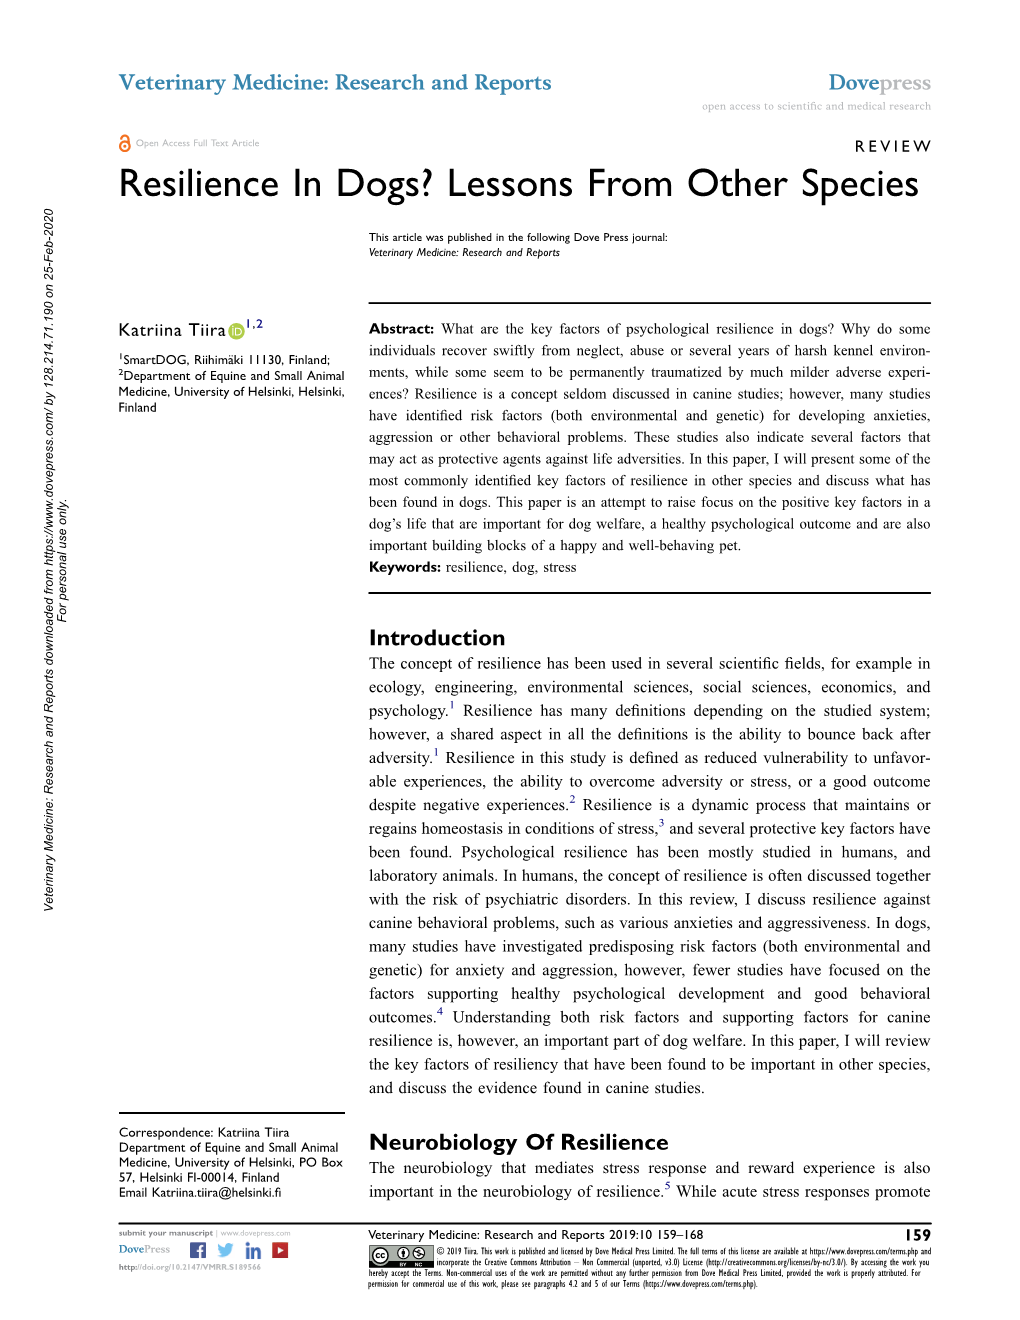 Resilience in Dogs? Lessons from Other Species